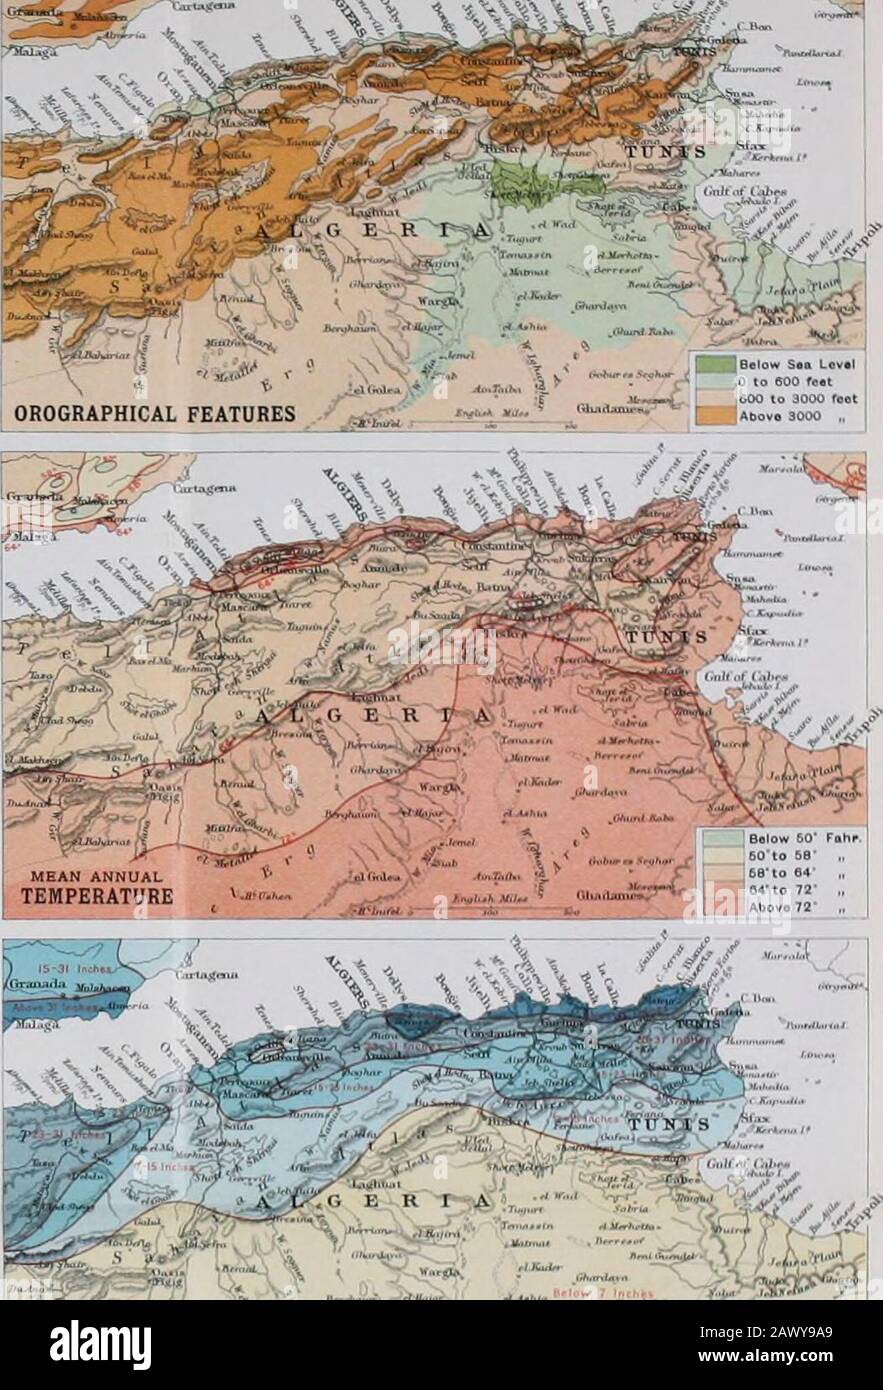 Scottish geographical magazine . 3^  ^i^^i^S^^MaSUm^-^ -- i&lt;rai. s^ THE SITUATION IX ALGERIA. 195 have been unfairly treated, and the colonists have been coddled;(2) division of responsibility has led to the practical irresponsibility ofthe active agents of the Government; (3) the colony has been treated asa Department of France, whereas, in fact, it is a colony pure and simple,in which the European colonists form the mere fraction of a hostile popu-lation, incapable of assimilation; and (4) not sufficient care has beentaken to introduce the right kind of colonist or qualified administrat Stock Photo